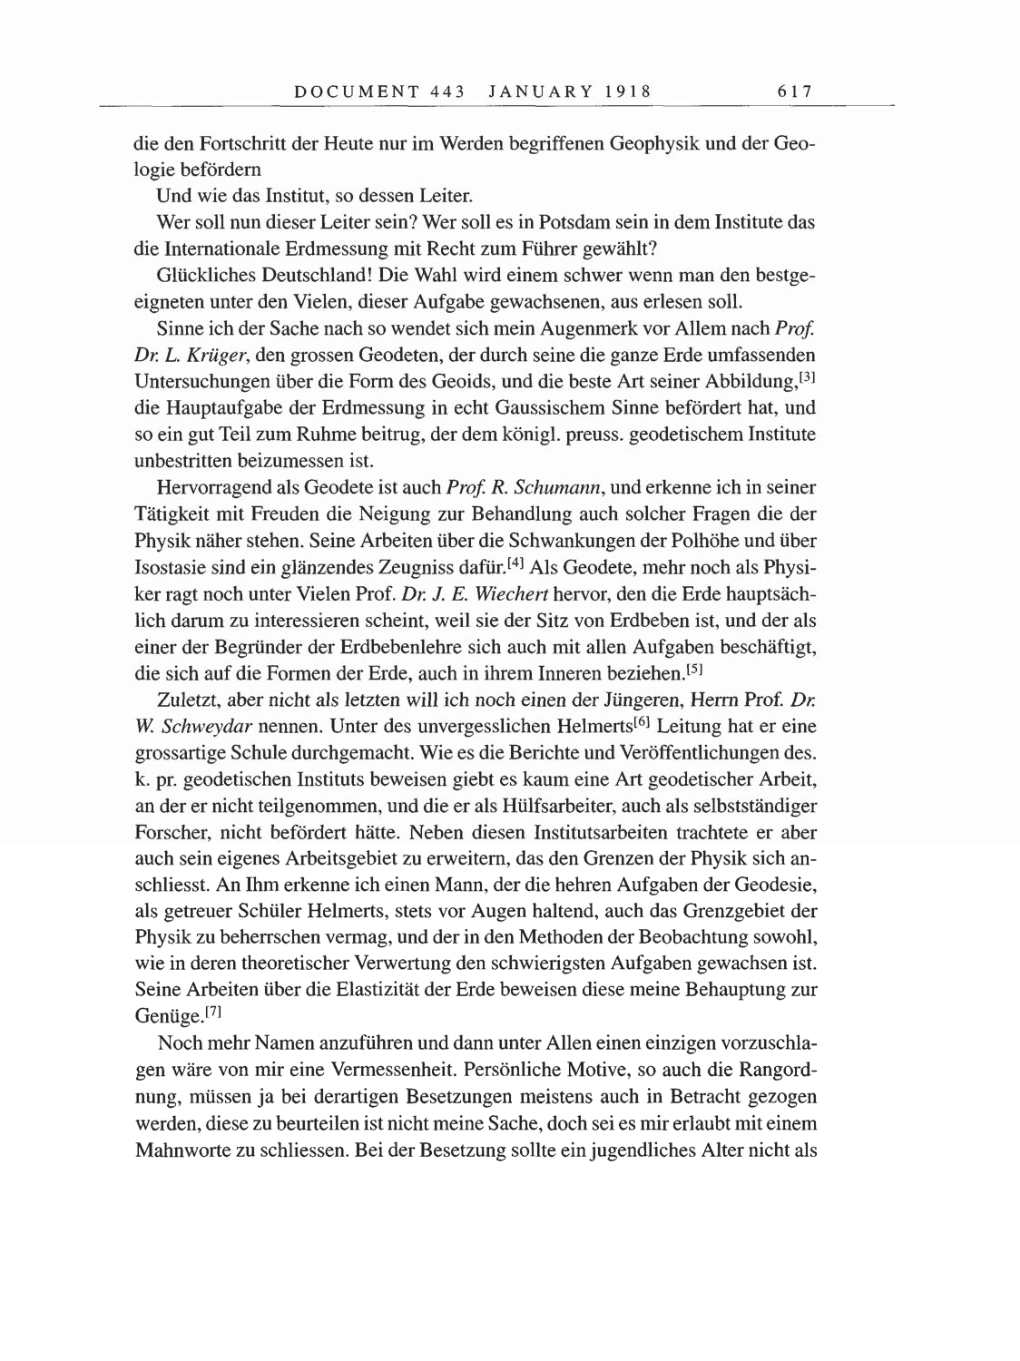 Volume 8, Part B: The Berlin Years: Correspondence 1918 page 617